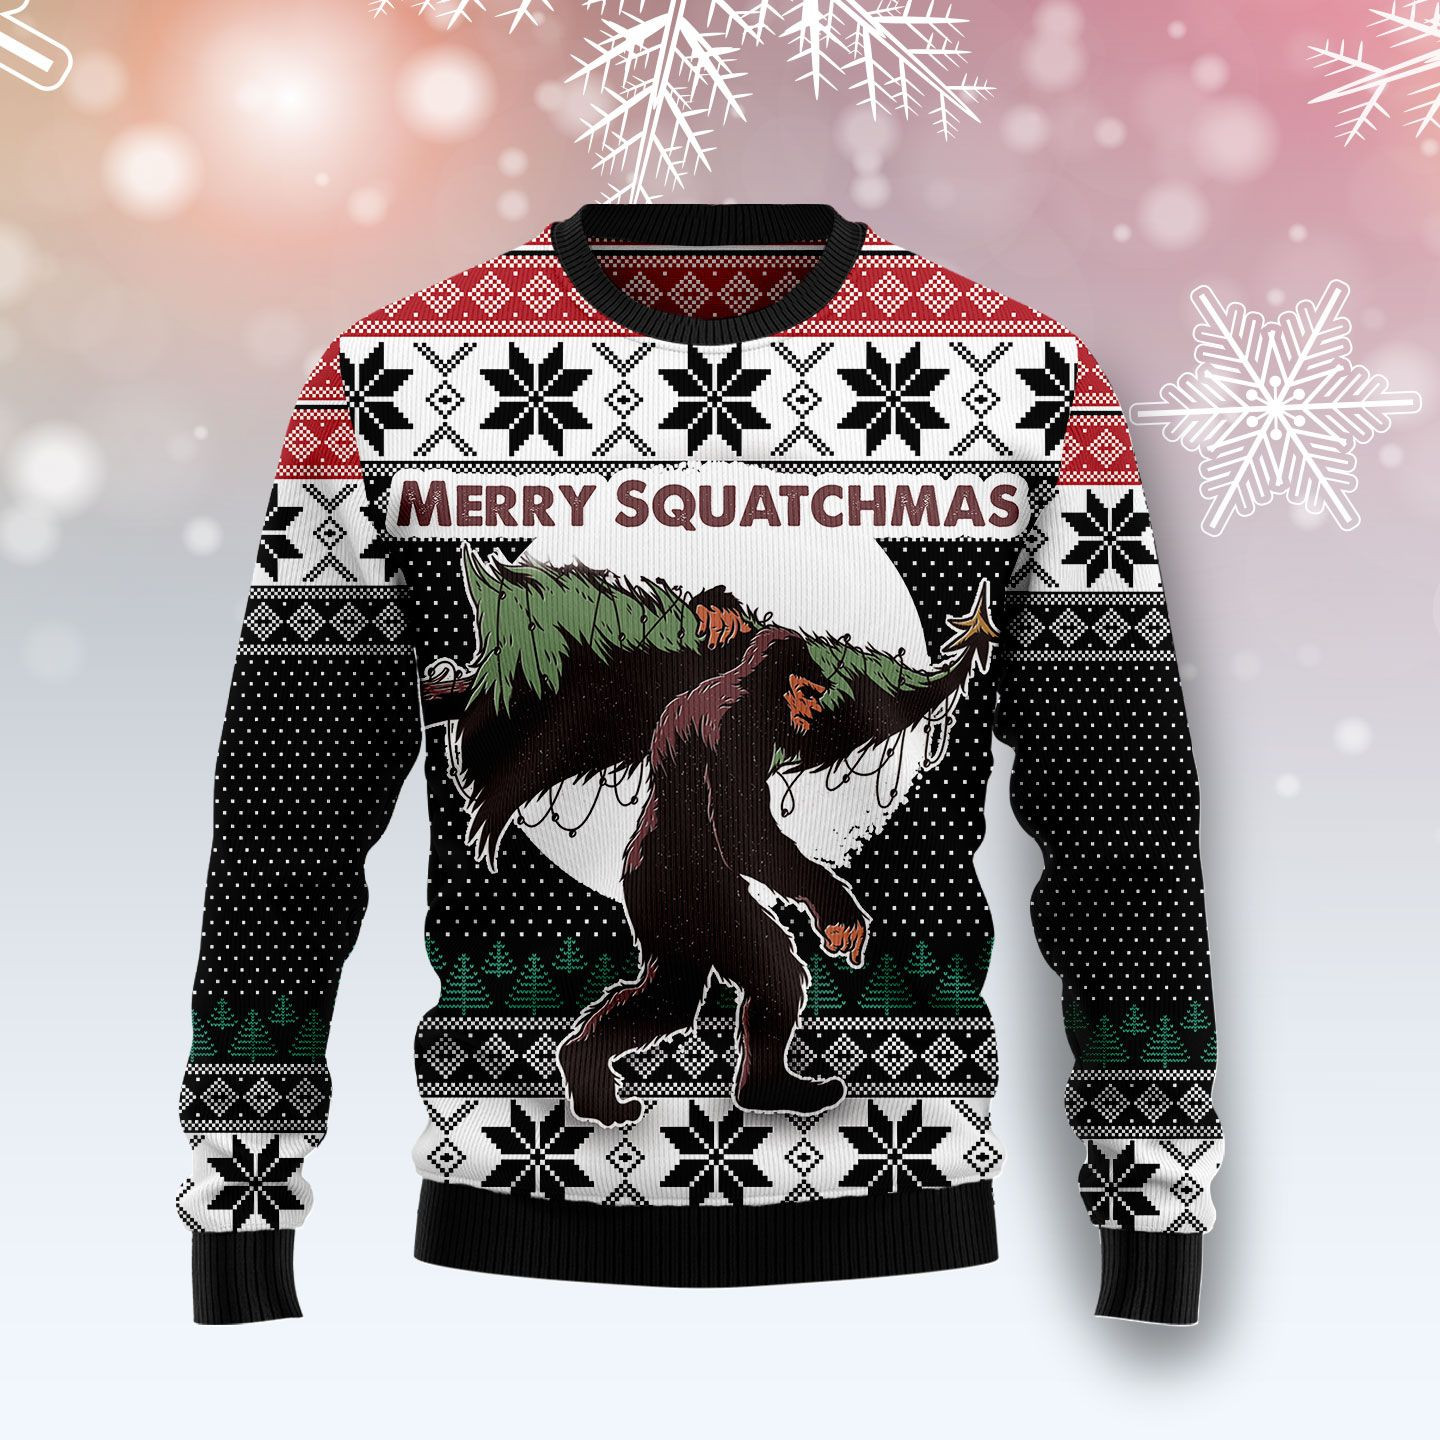 Bigfoot Squatchmas Ugly Christmas Sweater Ugly Sweater For Men Women